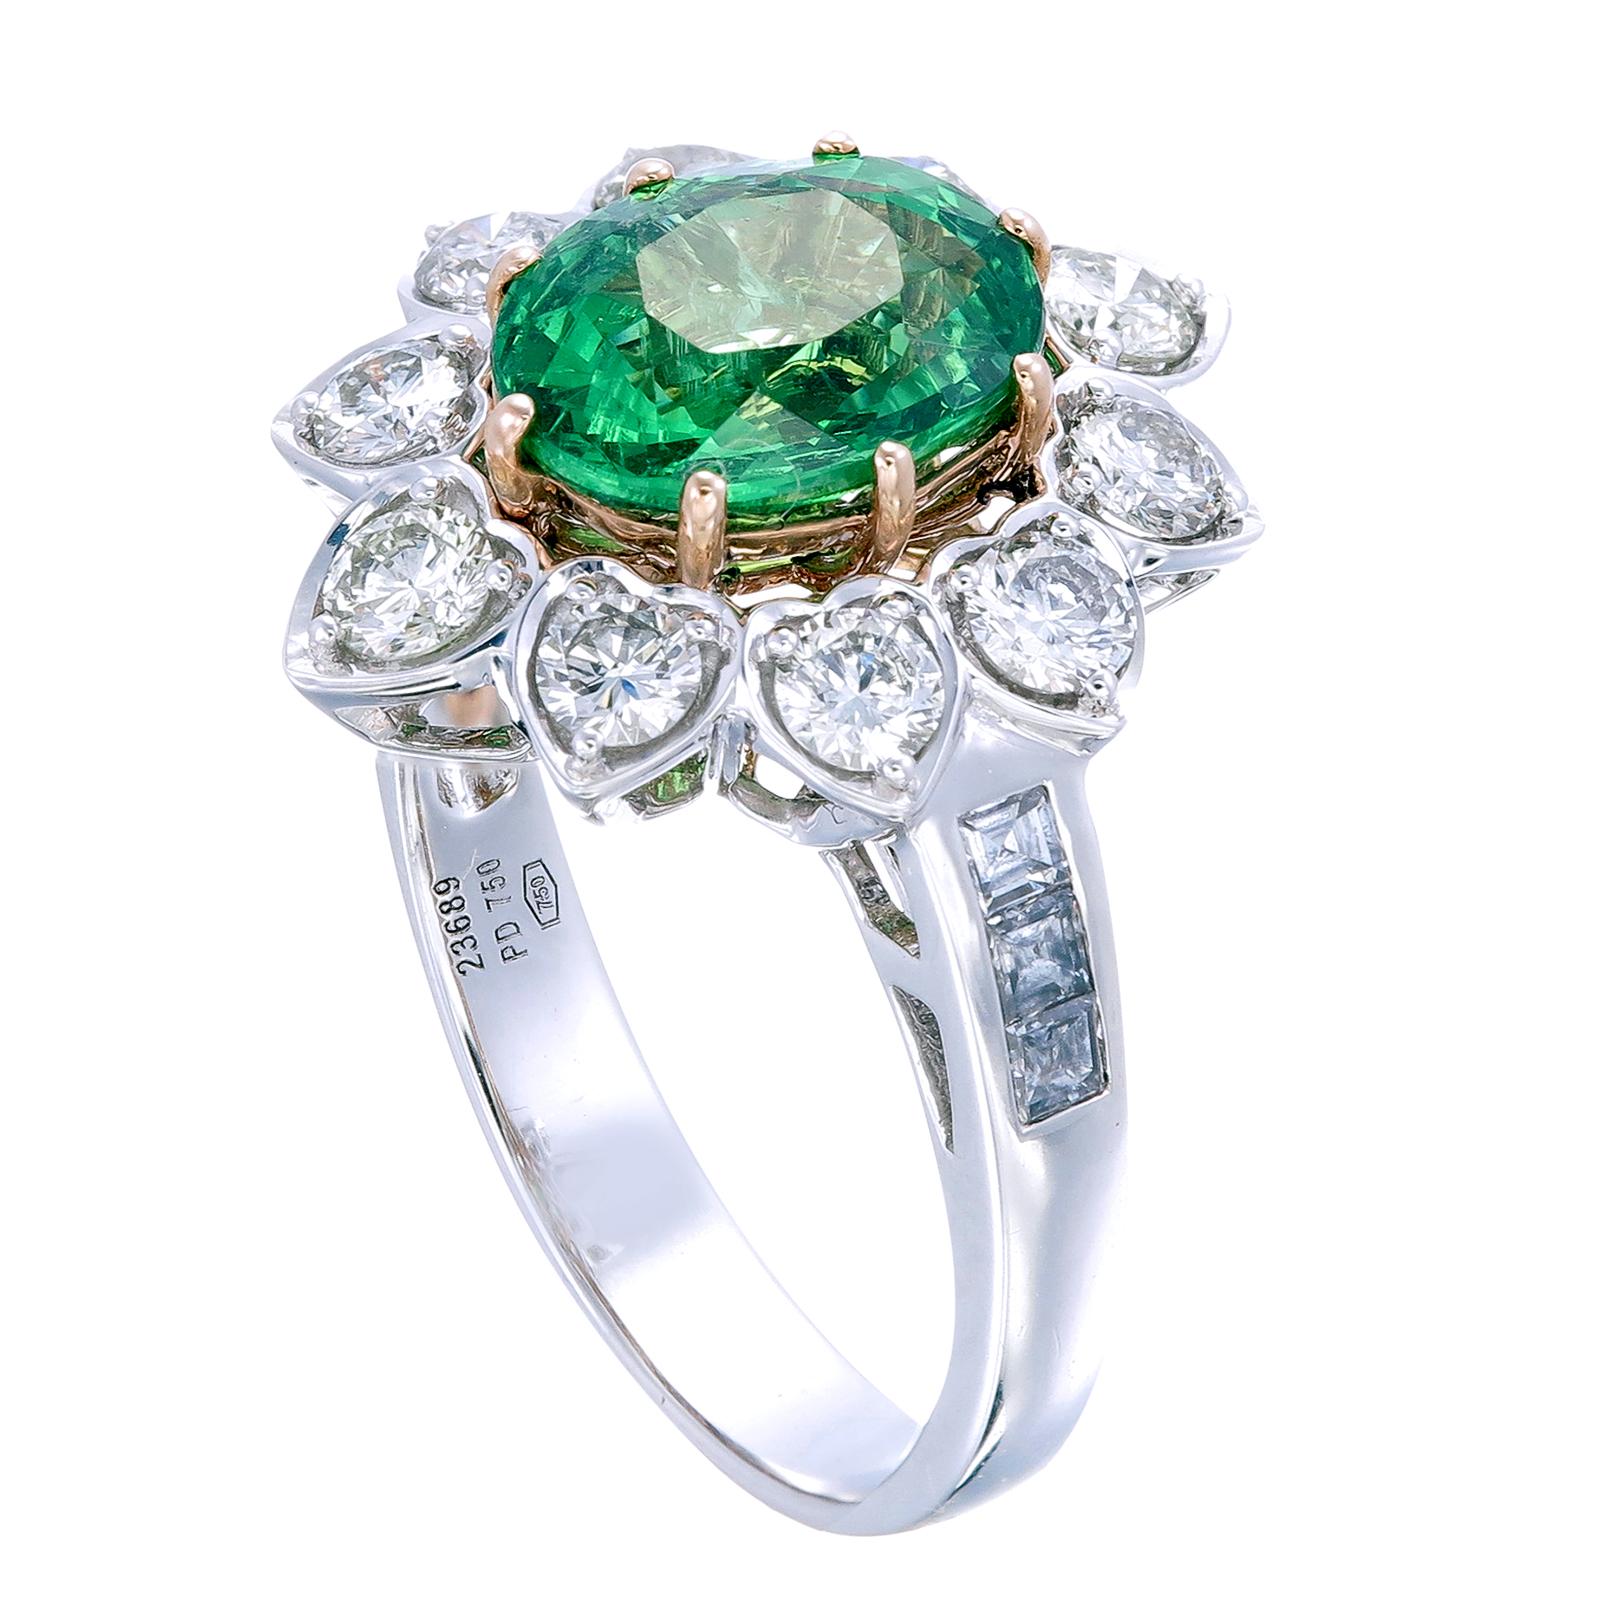 A 2.89-carat oval-shaped translucent tsavorite is the focal point of this elegant ring. It’s surrounded by 1.13-carat round diamonds in pear-shaped settings with each point further adorned with another small round diamond. The shank of the ring is